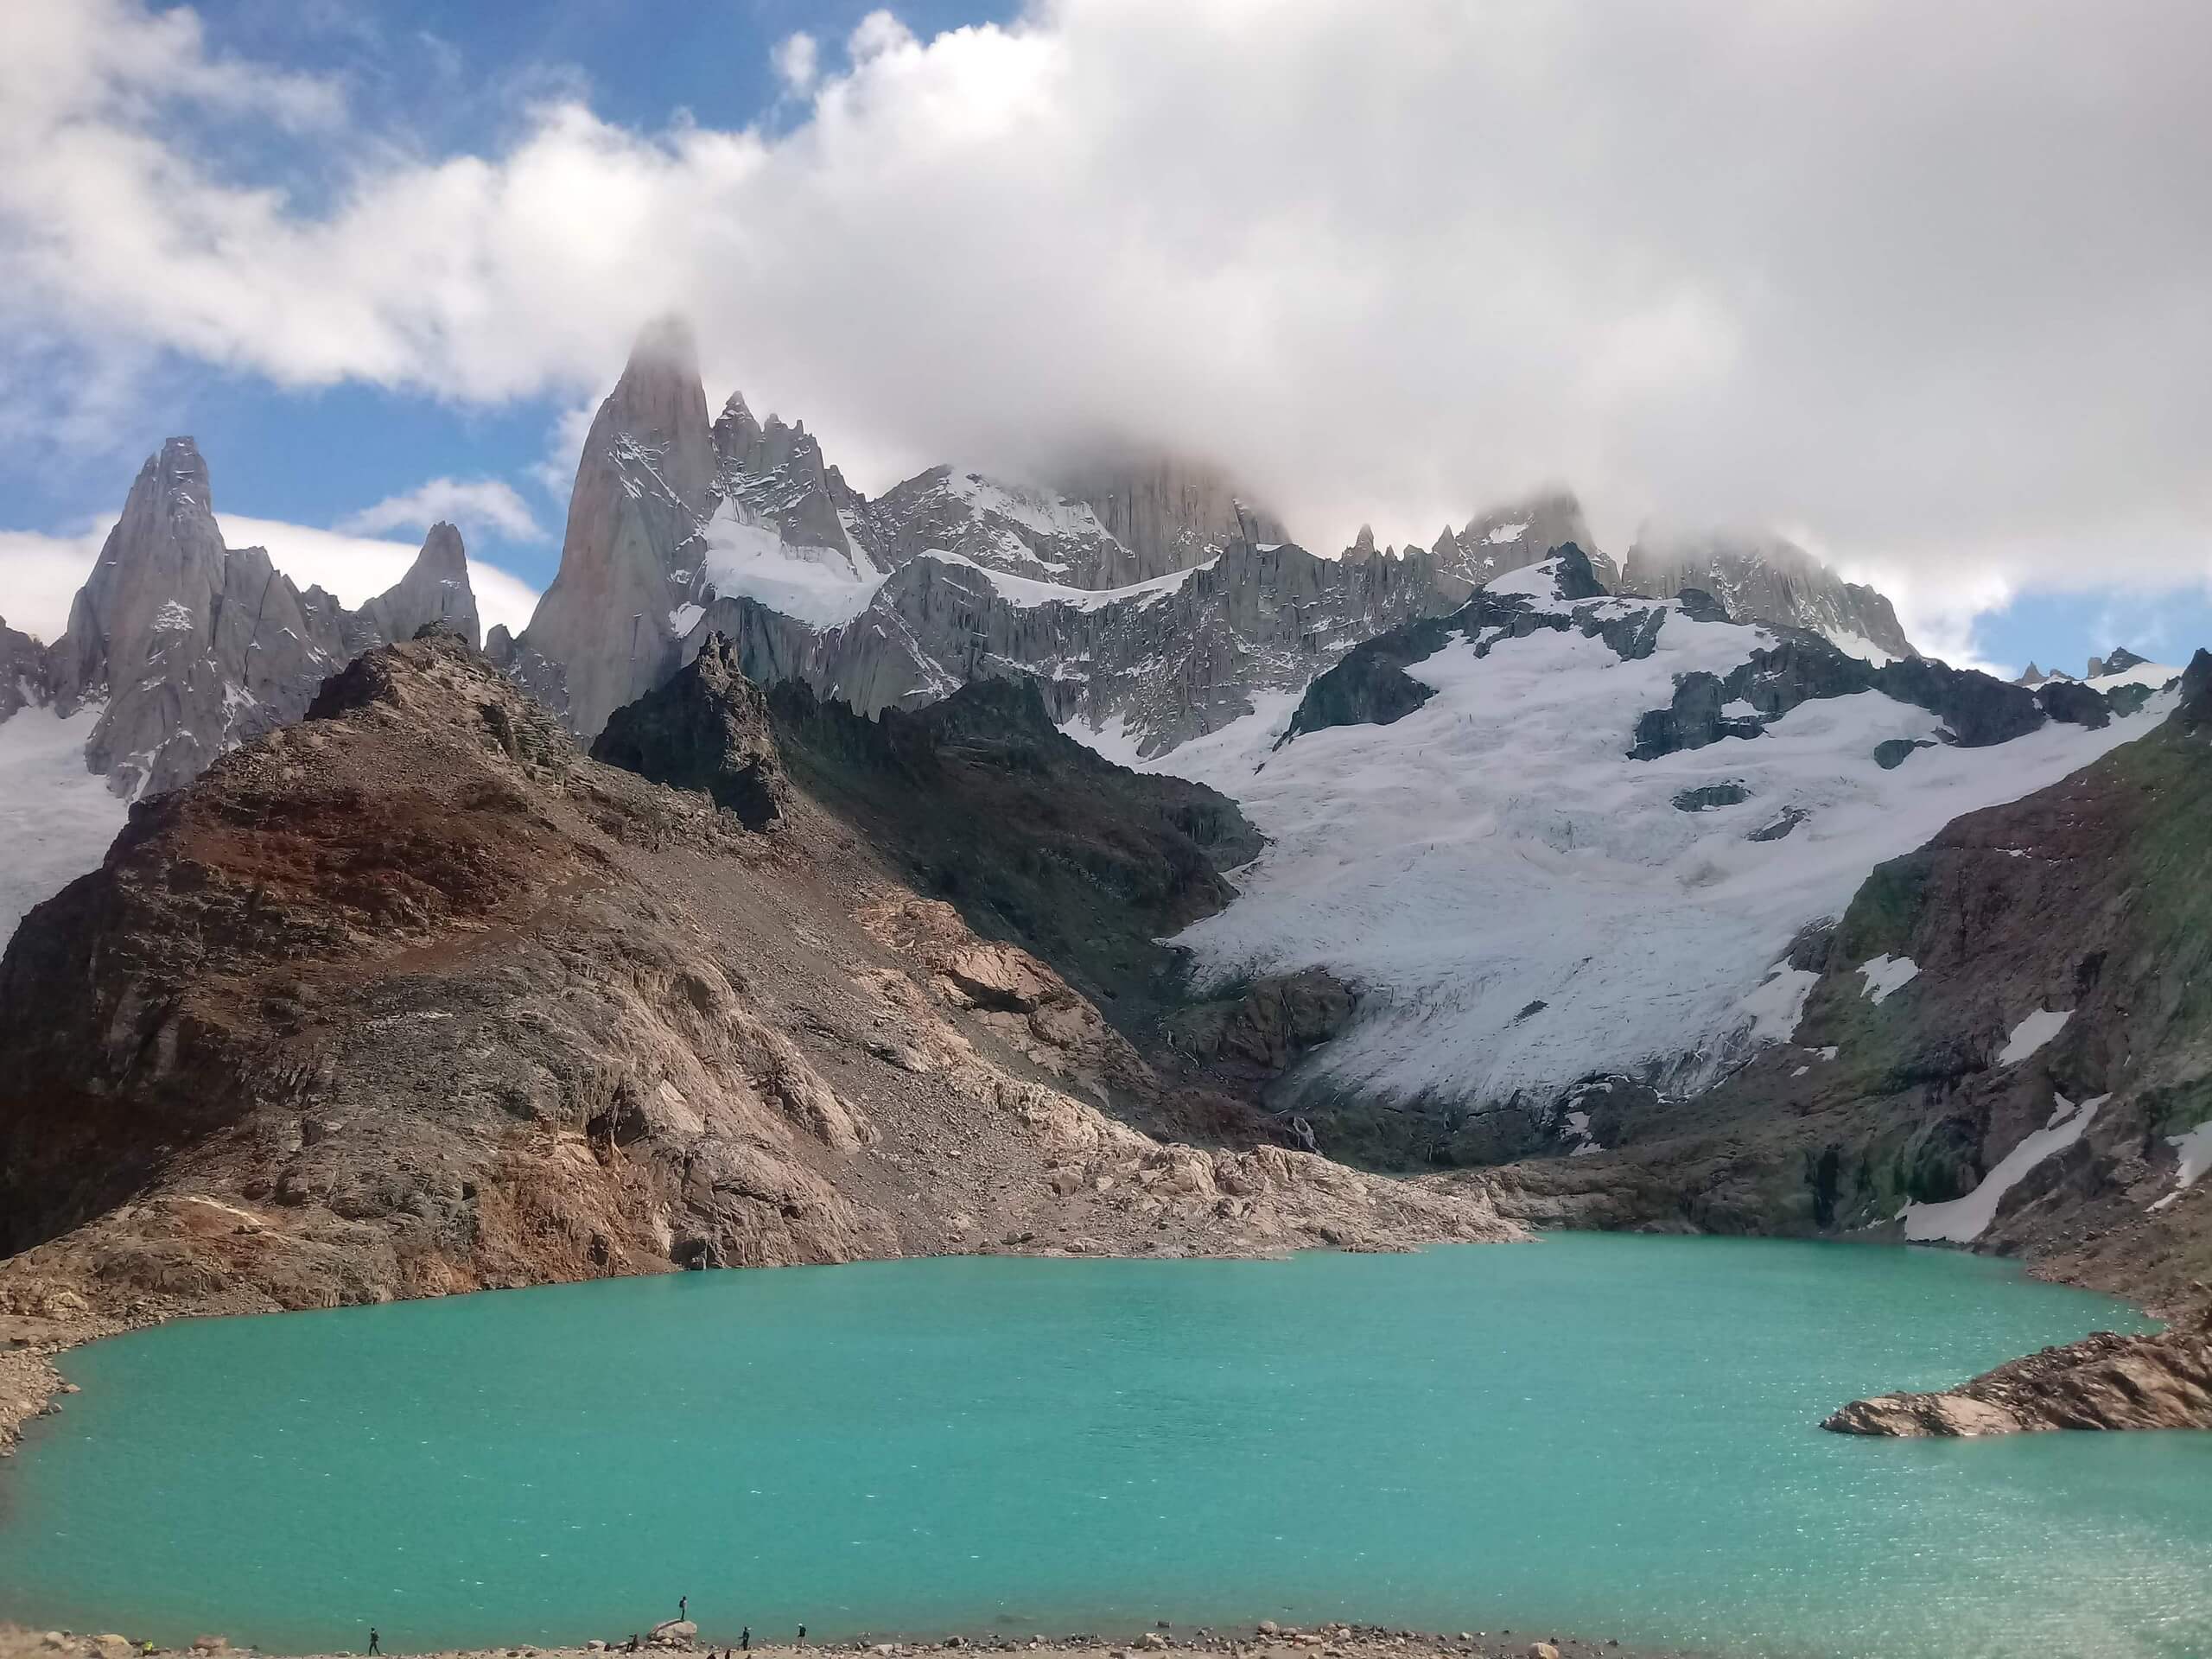 Mountains, lakes and glaciers in Patagonia